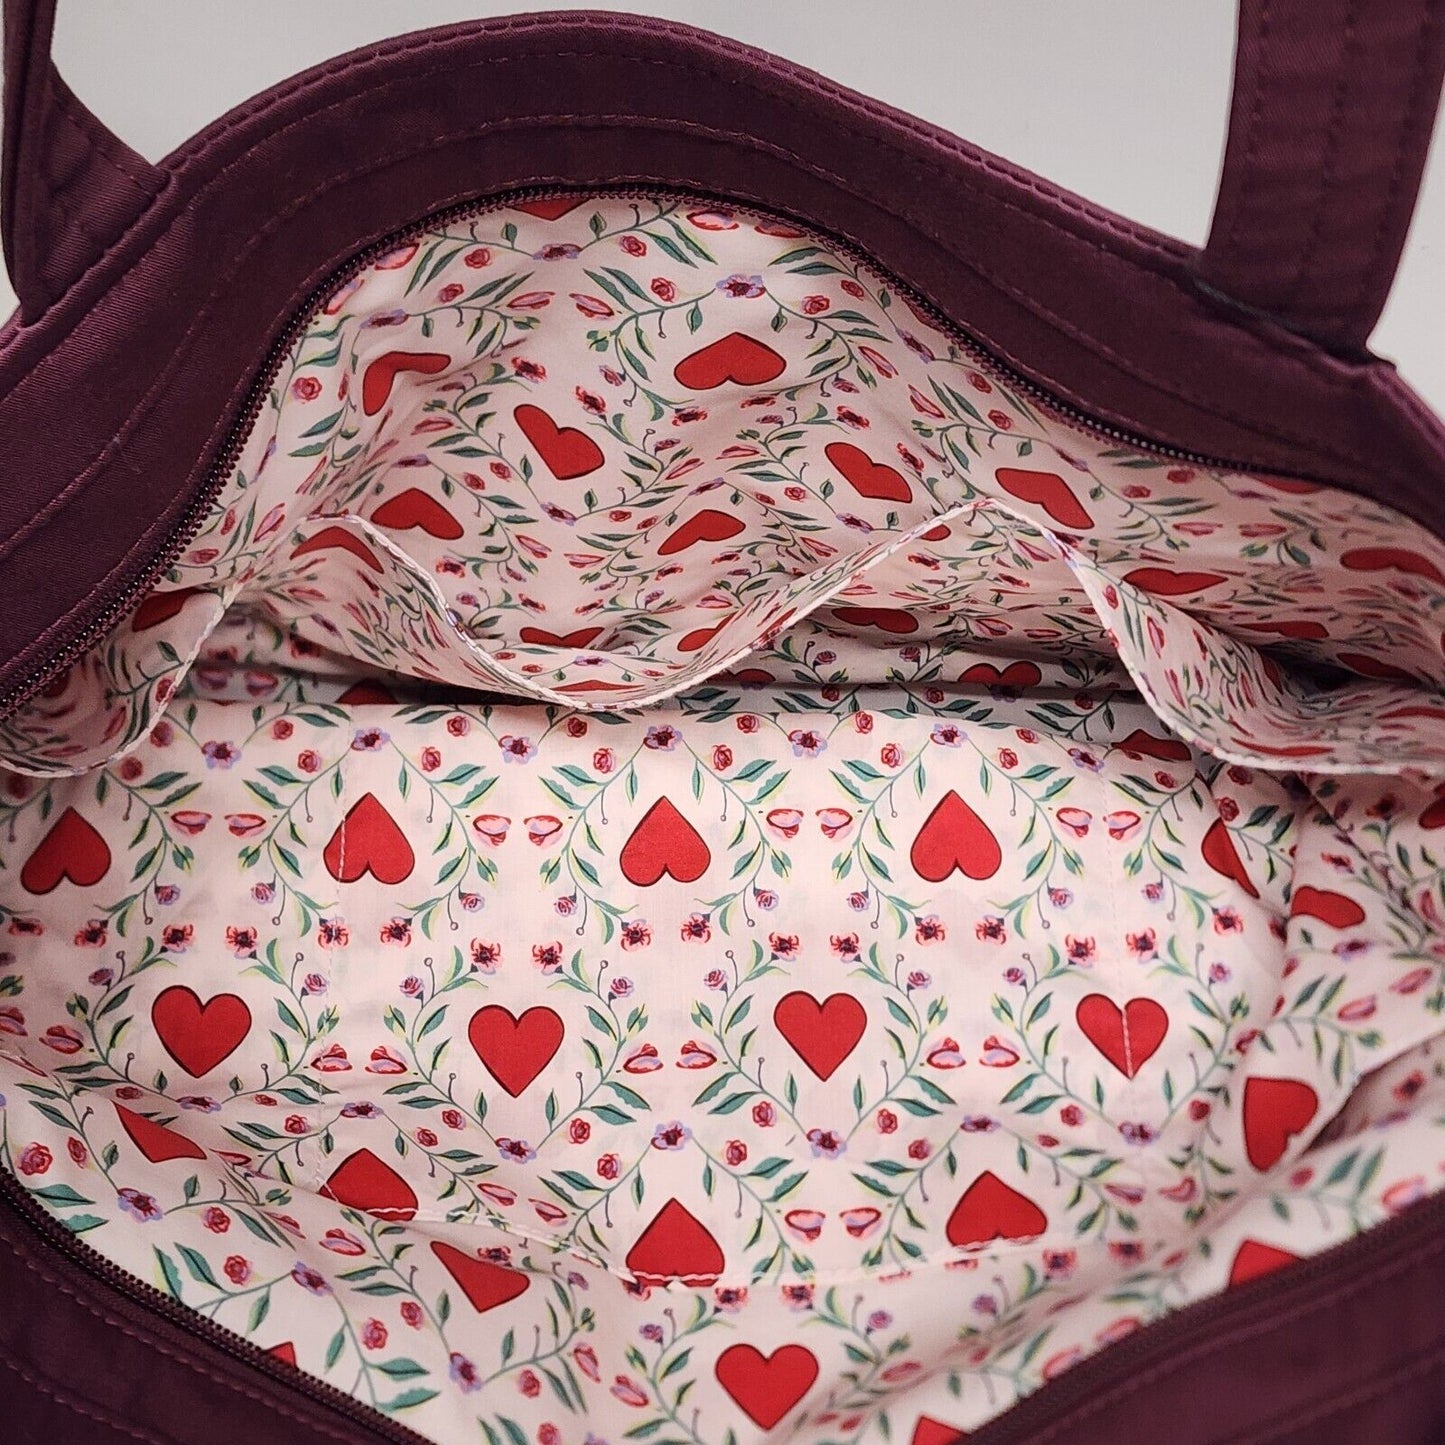 Vera Tote by Vera Bradley Imperial Hearts Red NWT 15"L x 5½"W x 14"H MSRP $140